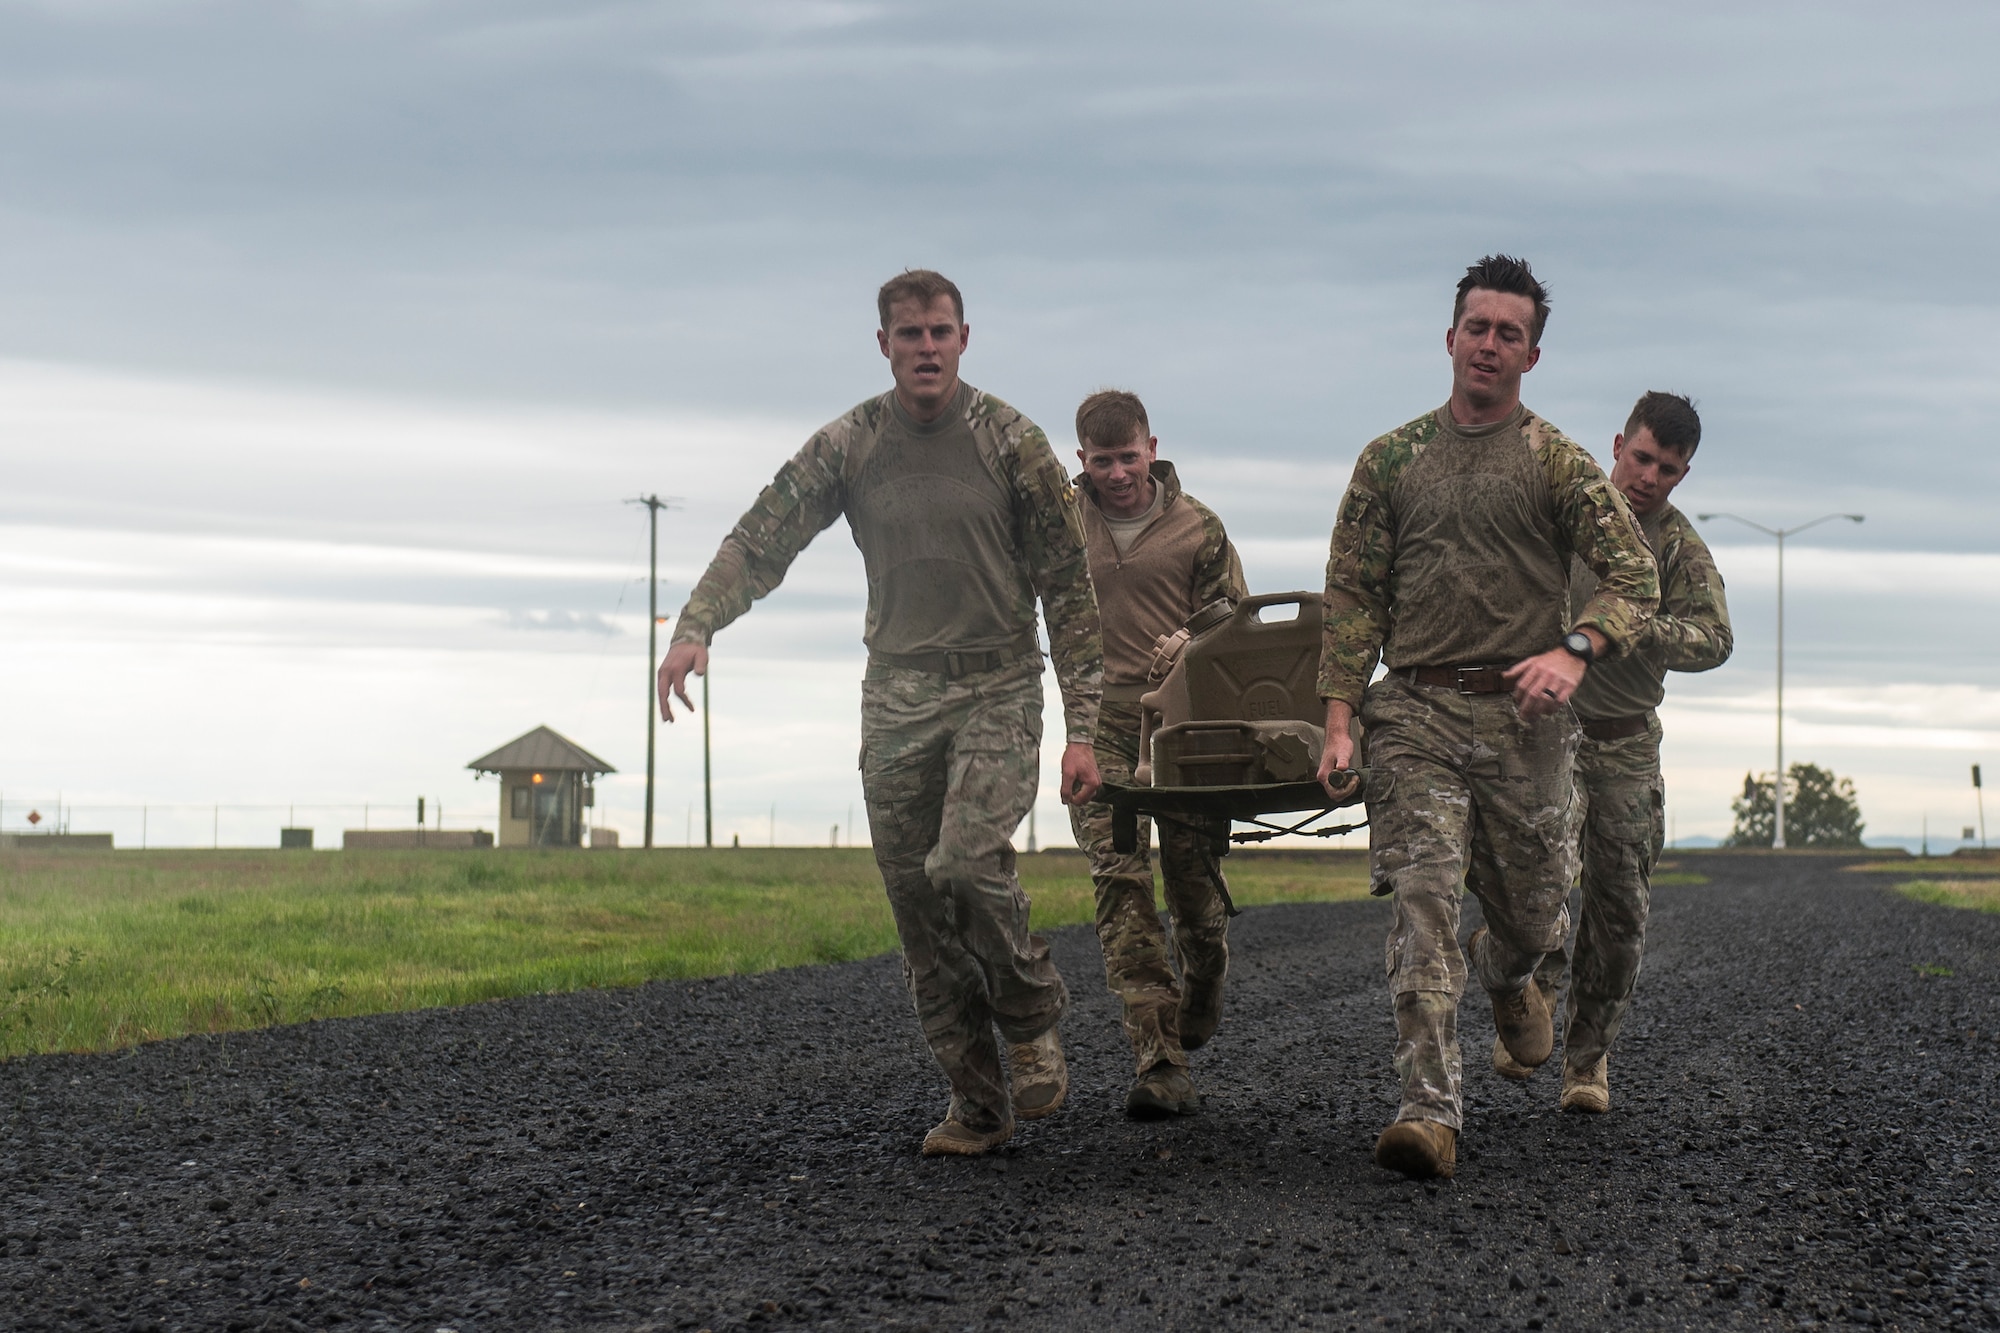 Airmen from the 22nd Training Squadron participate in the Defender Challenge during National Police Week at Fairchild Air Force Base, Washington, May 18, 2018. Teams raced to complete series of timed obstacles to include securing a building and 4-person push-ups.